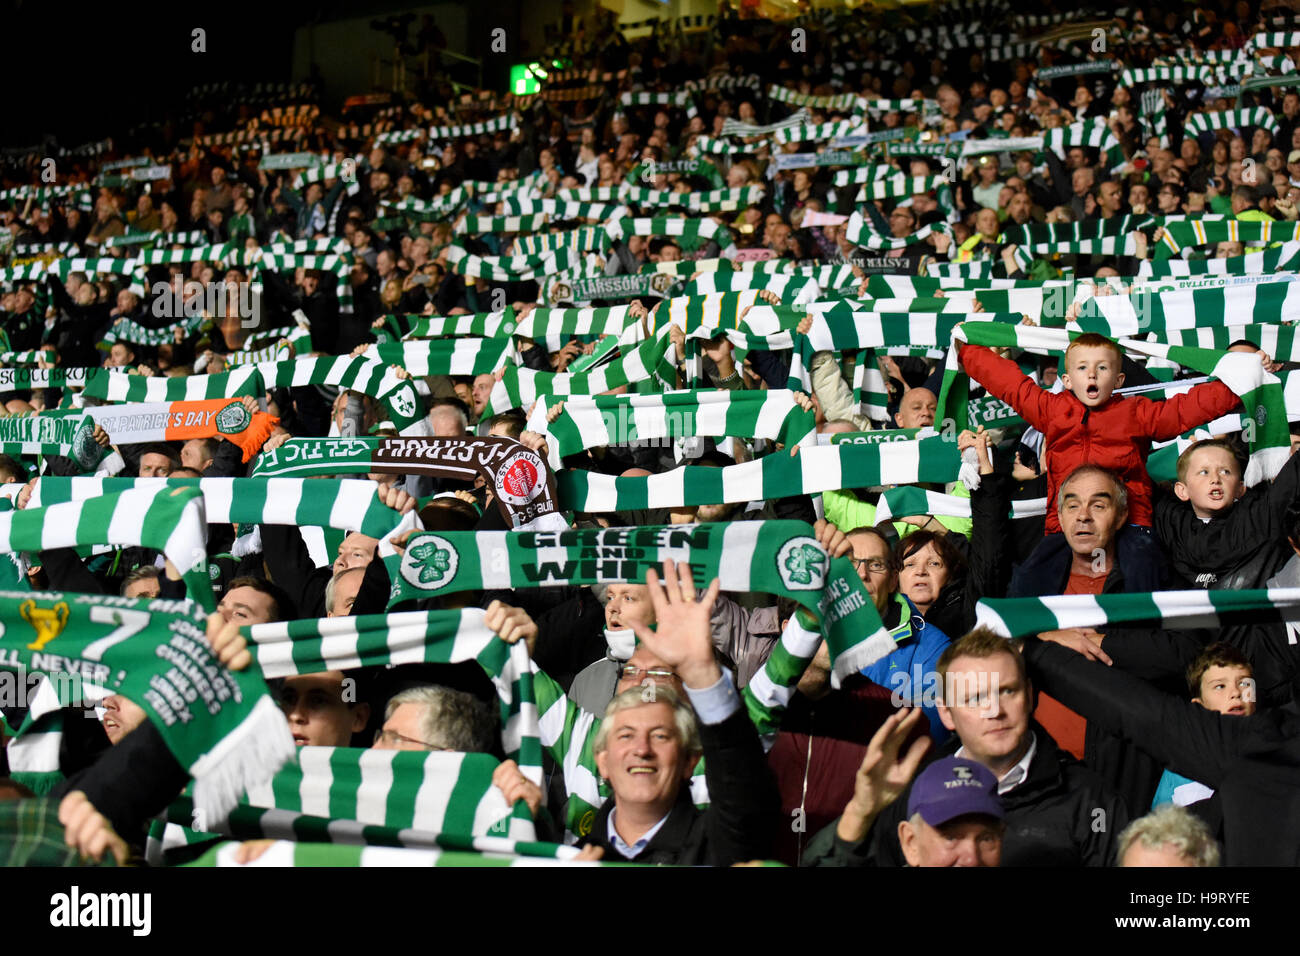 CelticFC fans sing a special rendition of “You'll Never Walk Alone